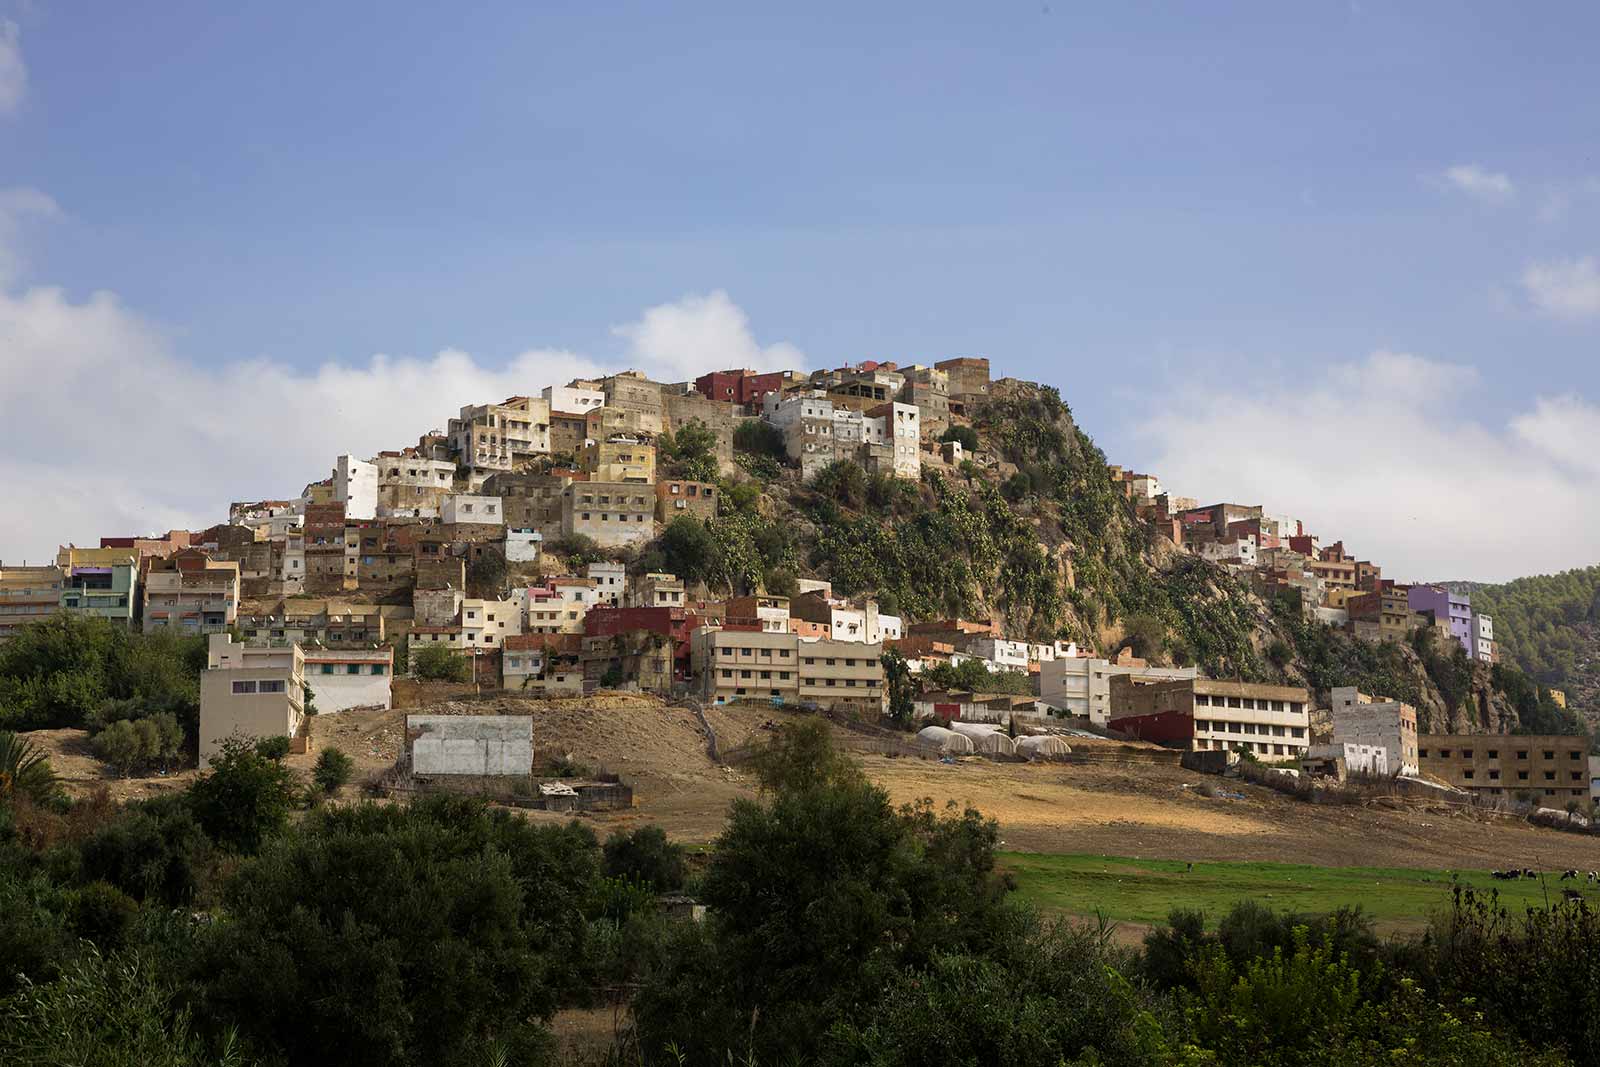 Moulay Idriss is reachable by just a pair of roads and spreads across two foothills of Mount Zerhoun, at the base of the Atlas Mountains.